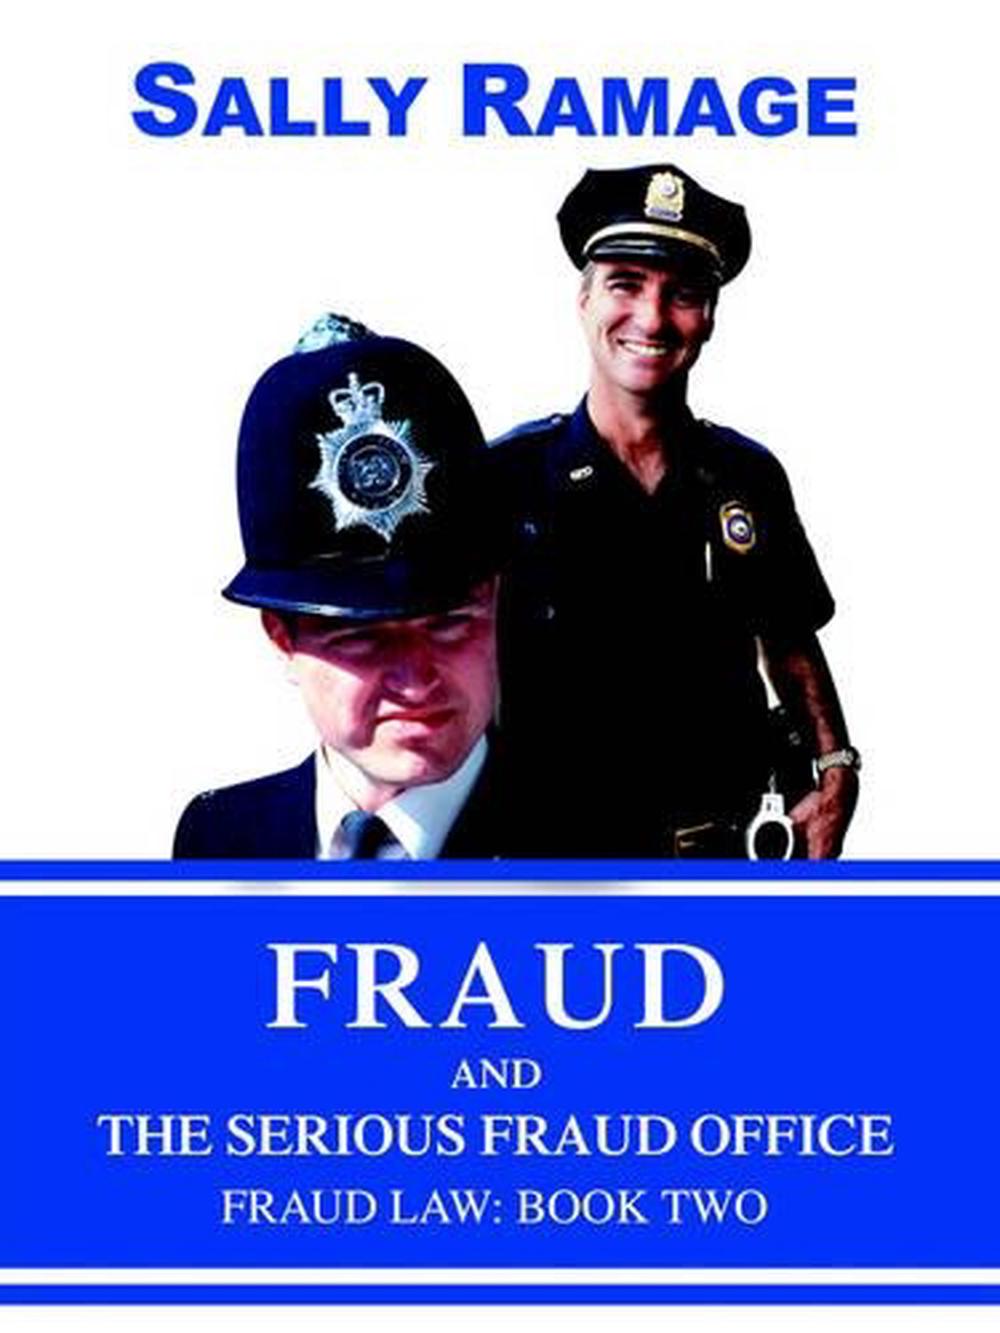 Fraud And The Serious Fraud Office Fraud Law Book Two By Sally Ramage English 9780595361212 